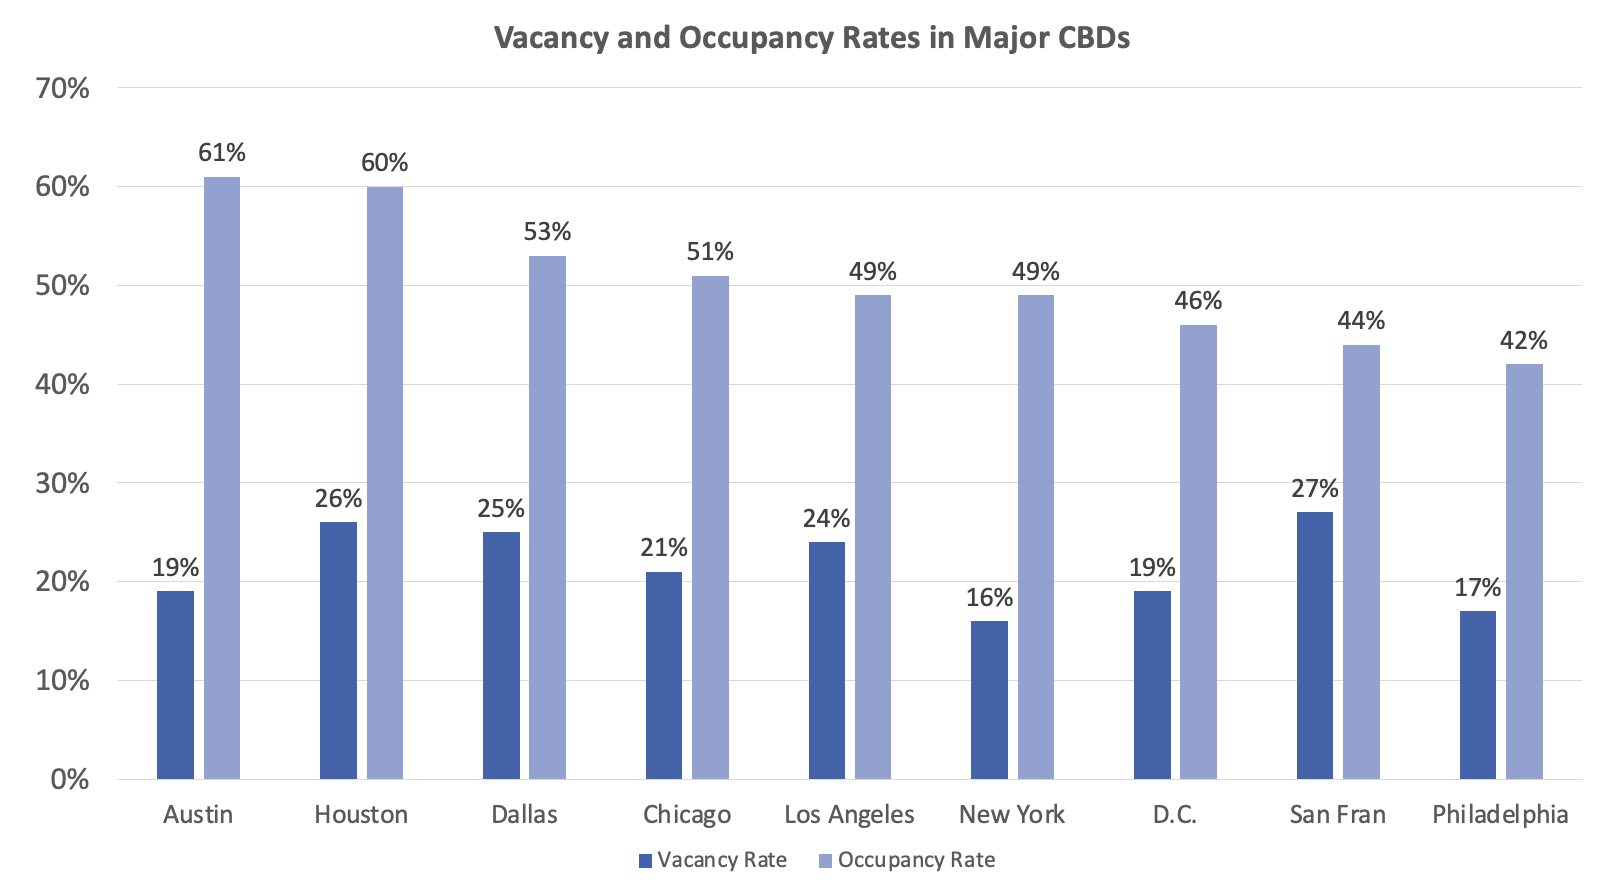 vacancy rates and occupancy rates